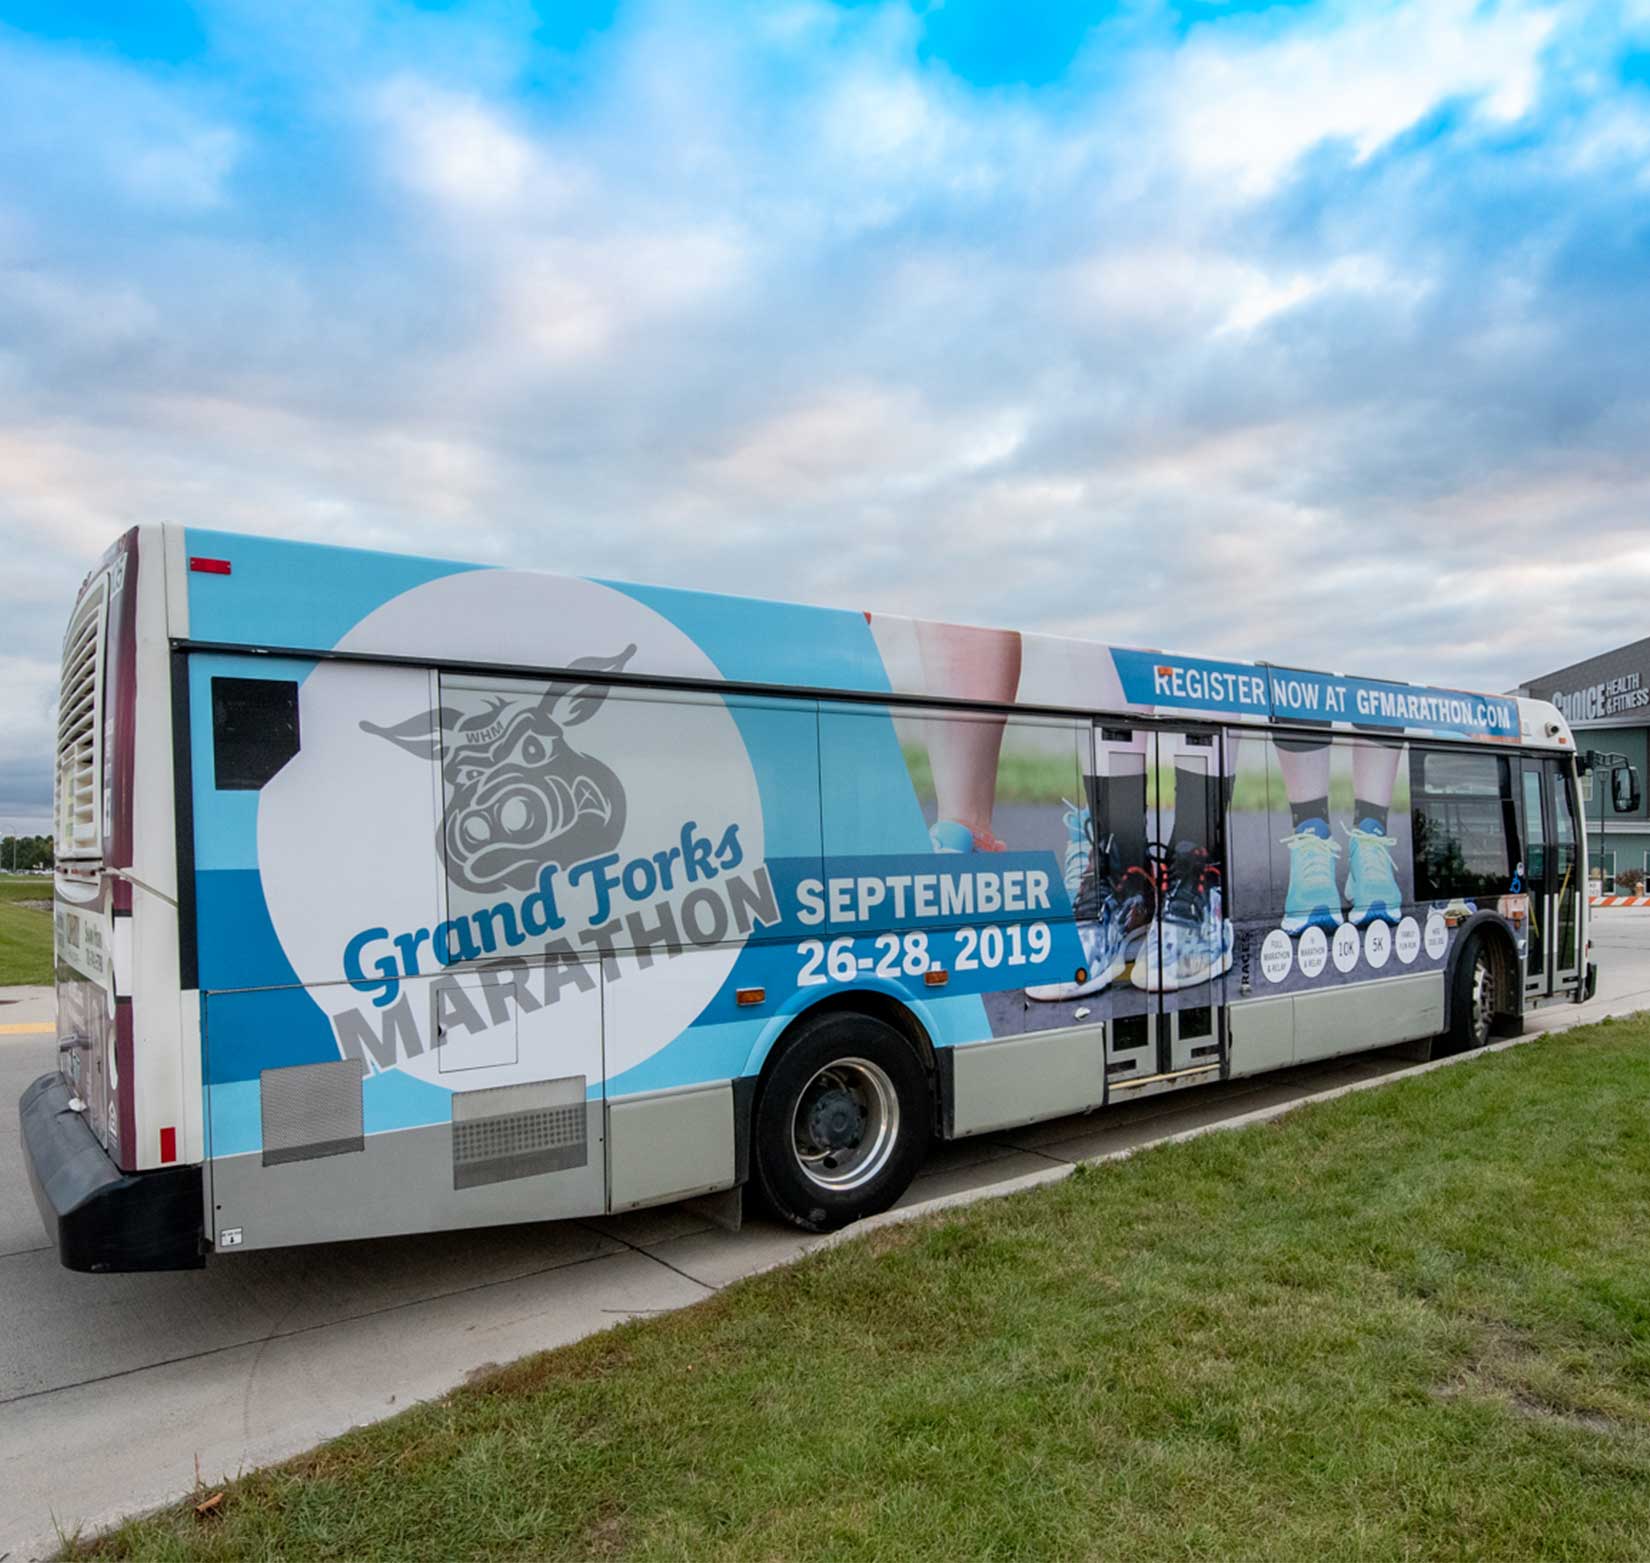 A bus wrap to promote the 2019 Grand Forks Marathon